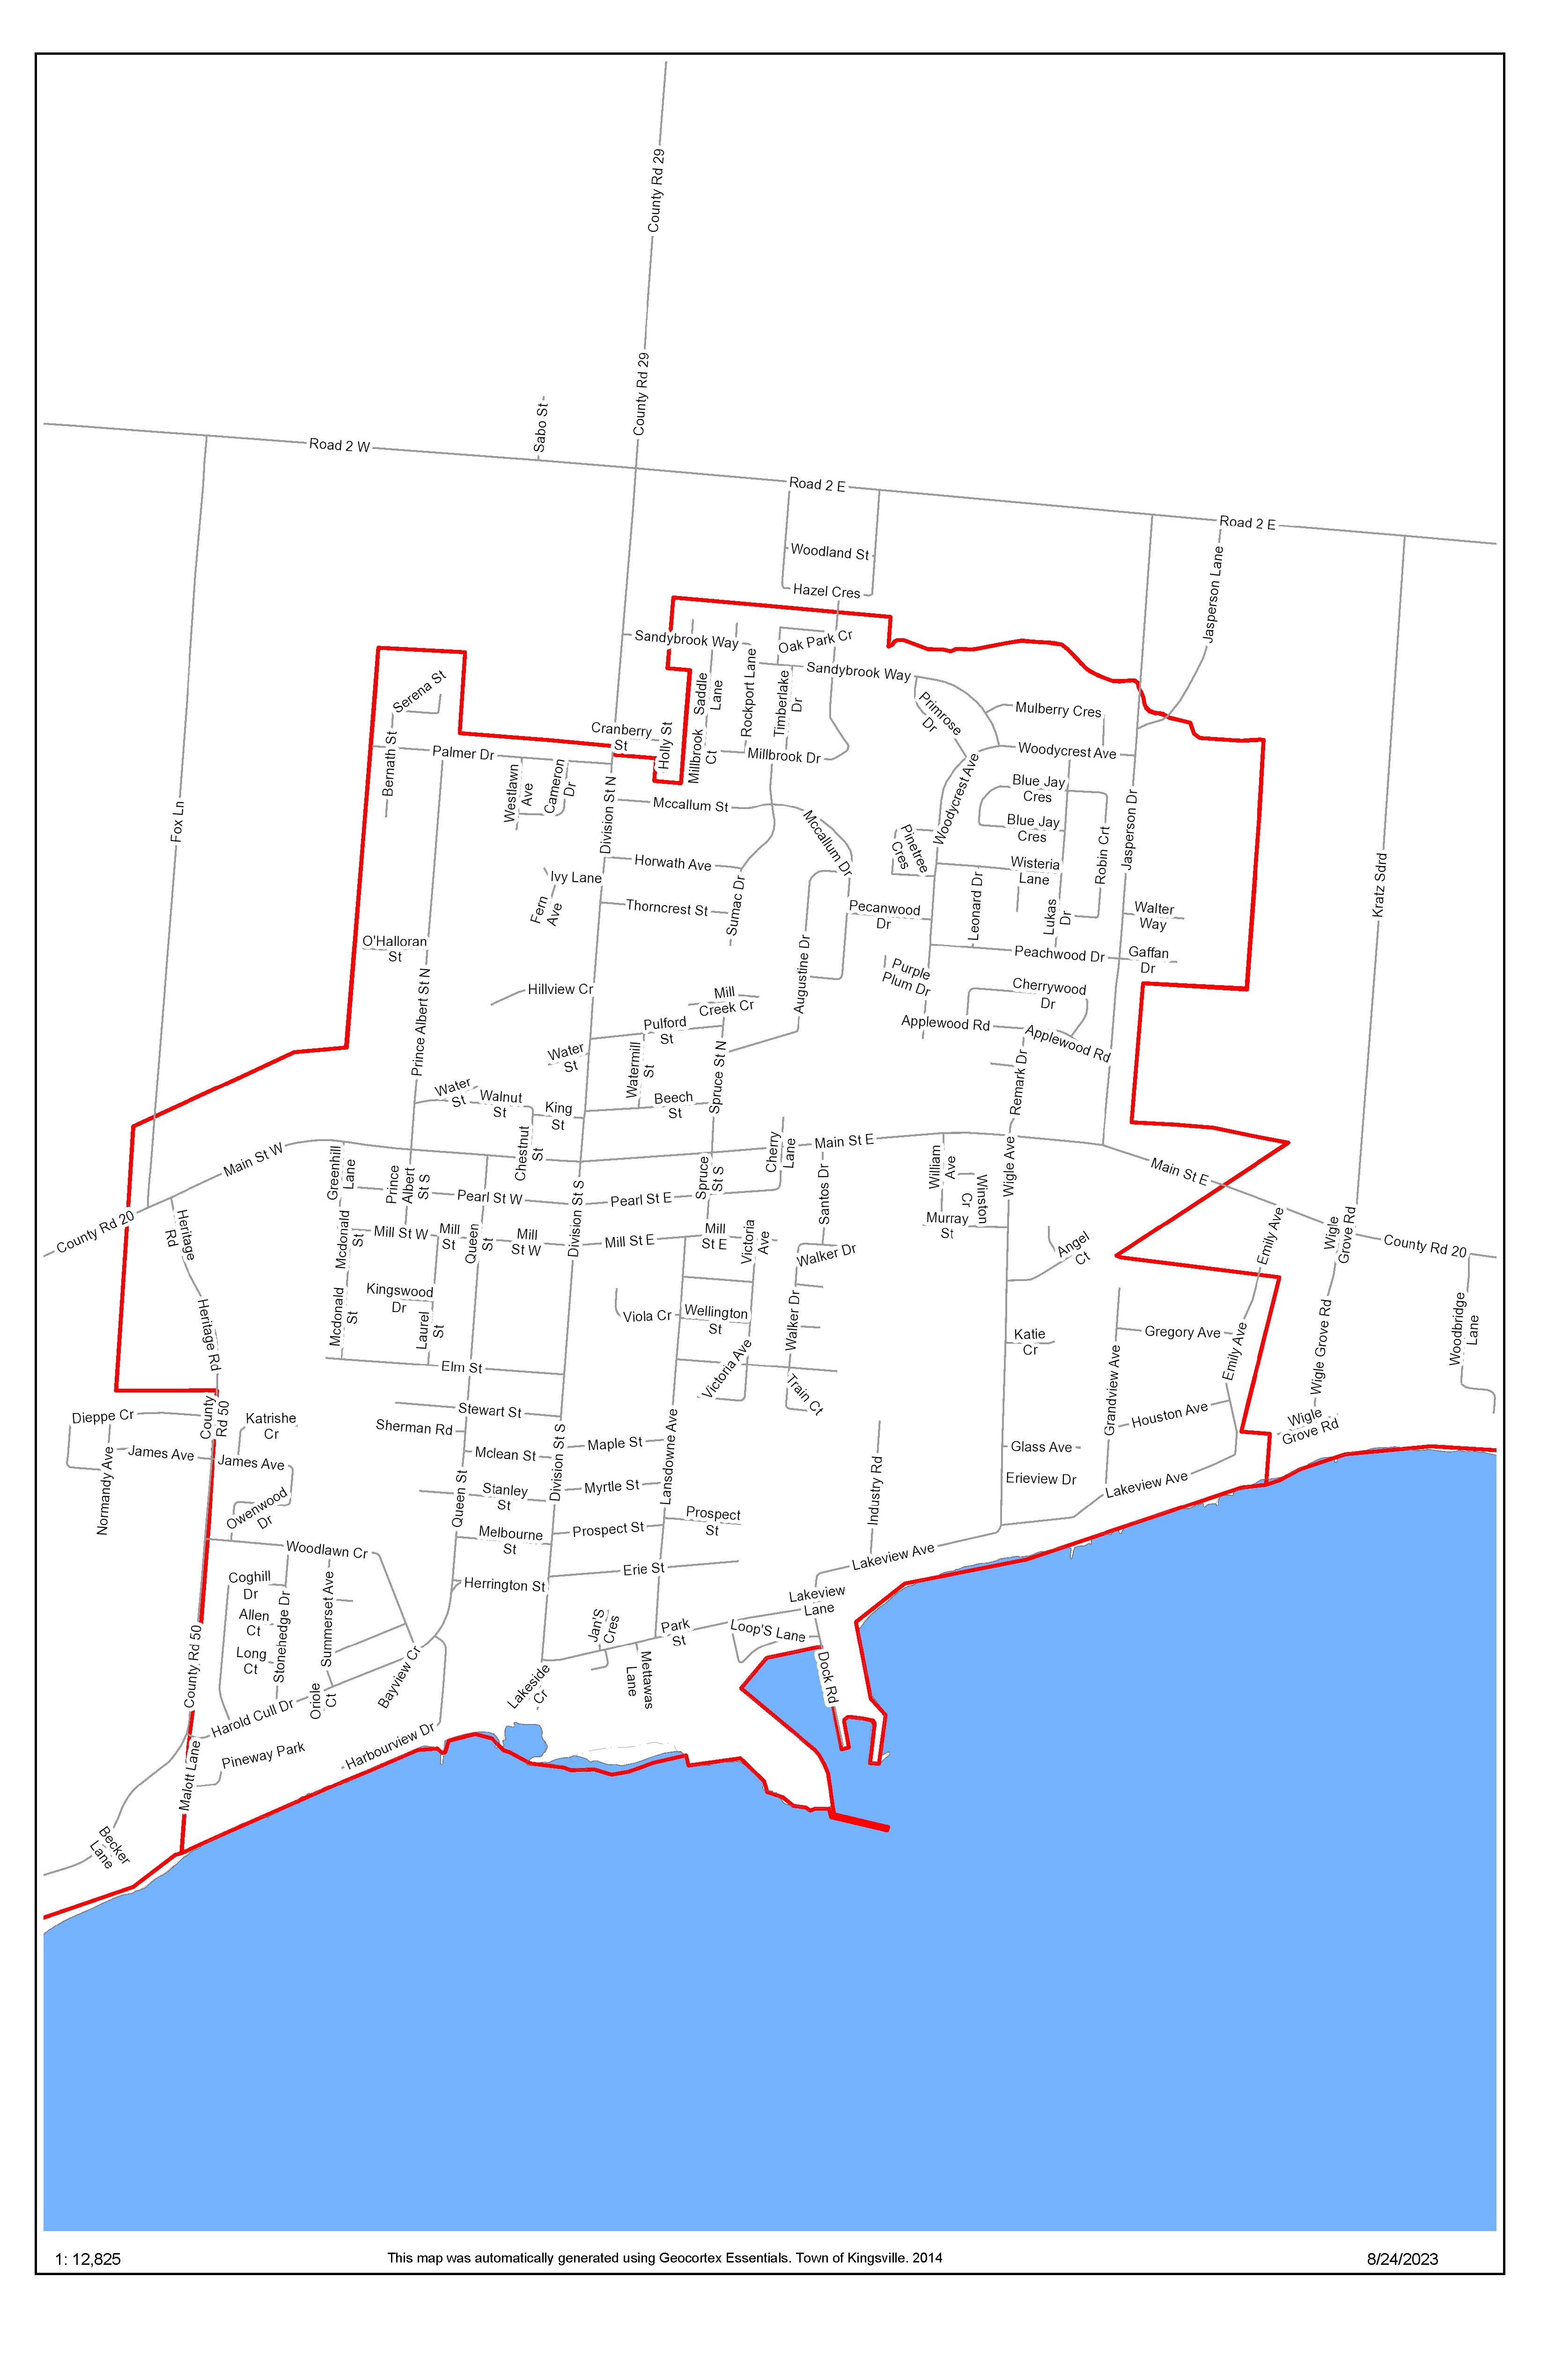 Town of Kingsville - Boil Water Advisory Map just streets